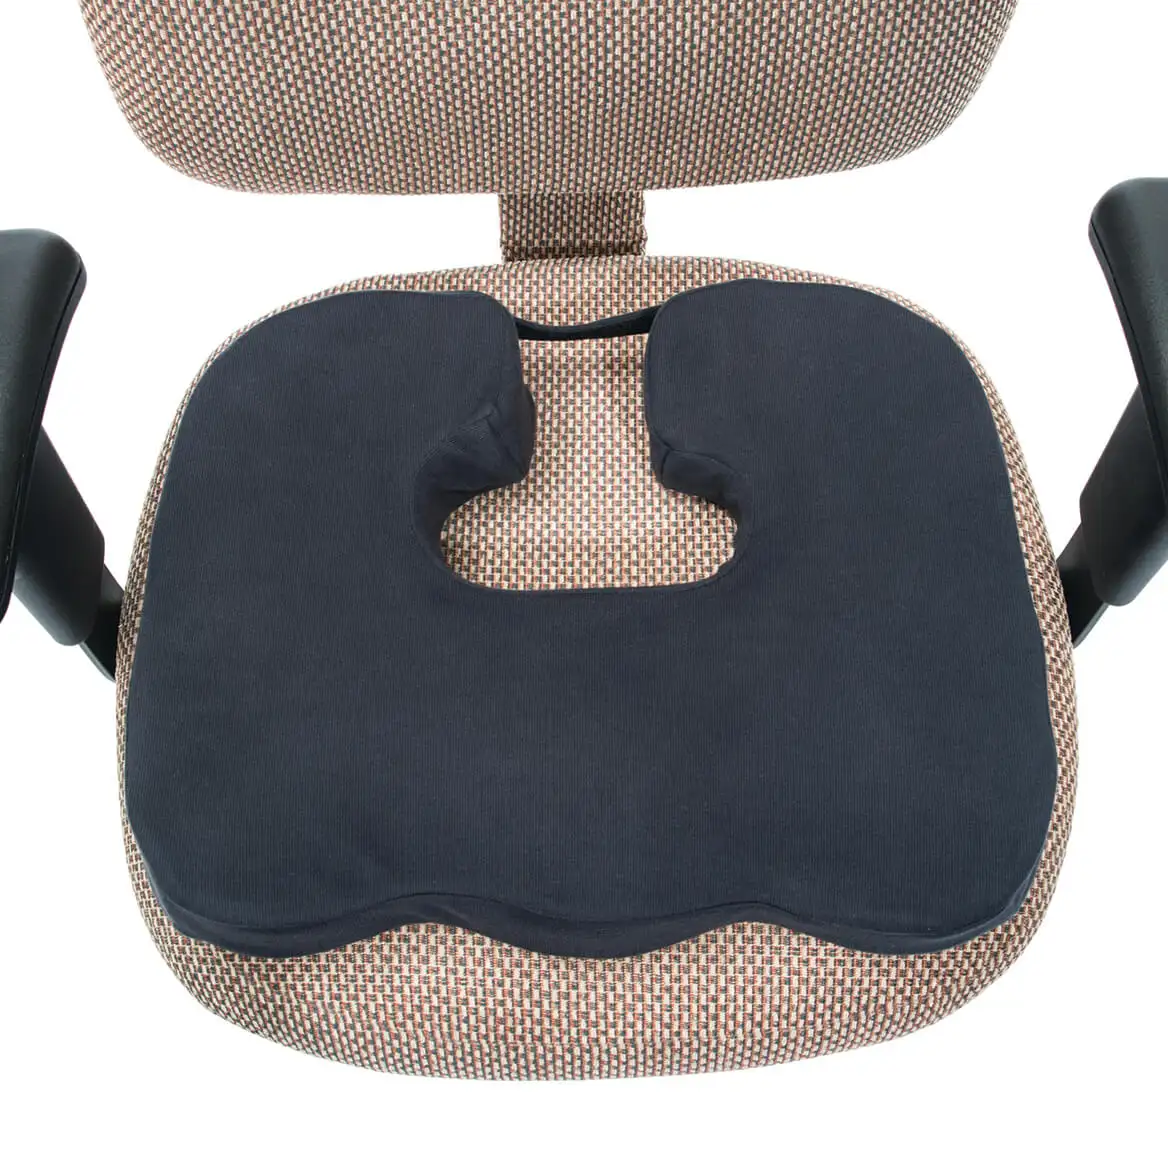 Eco-friendly memory foam 3 in 1 coccyx seat cushion pillow for office chair - memory foam